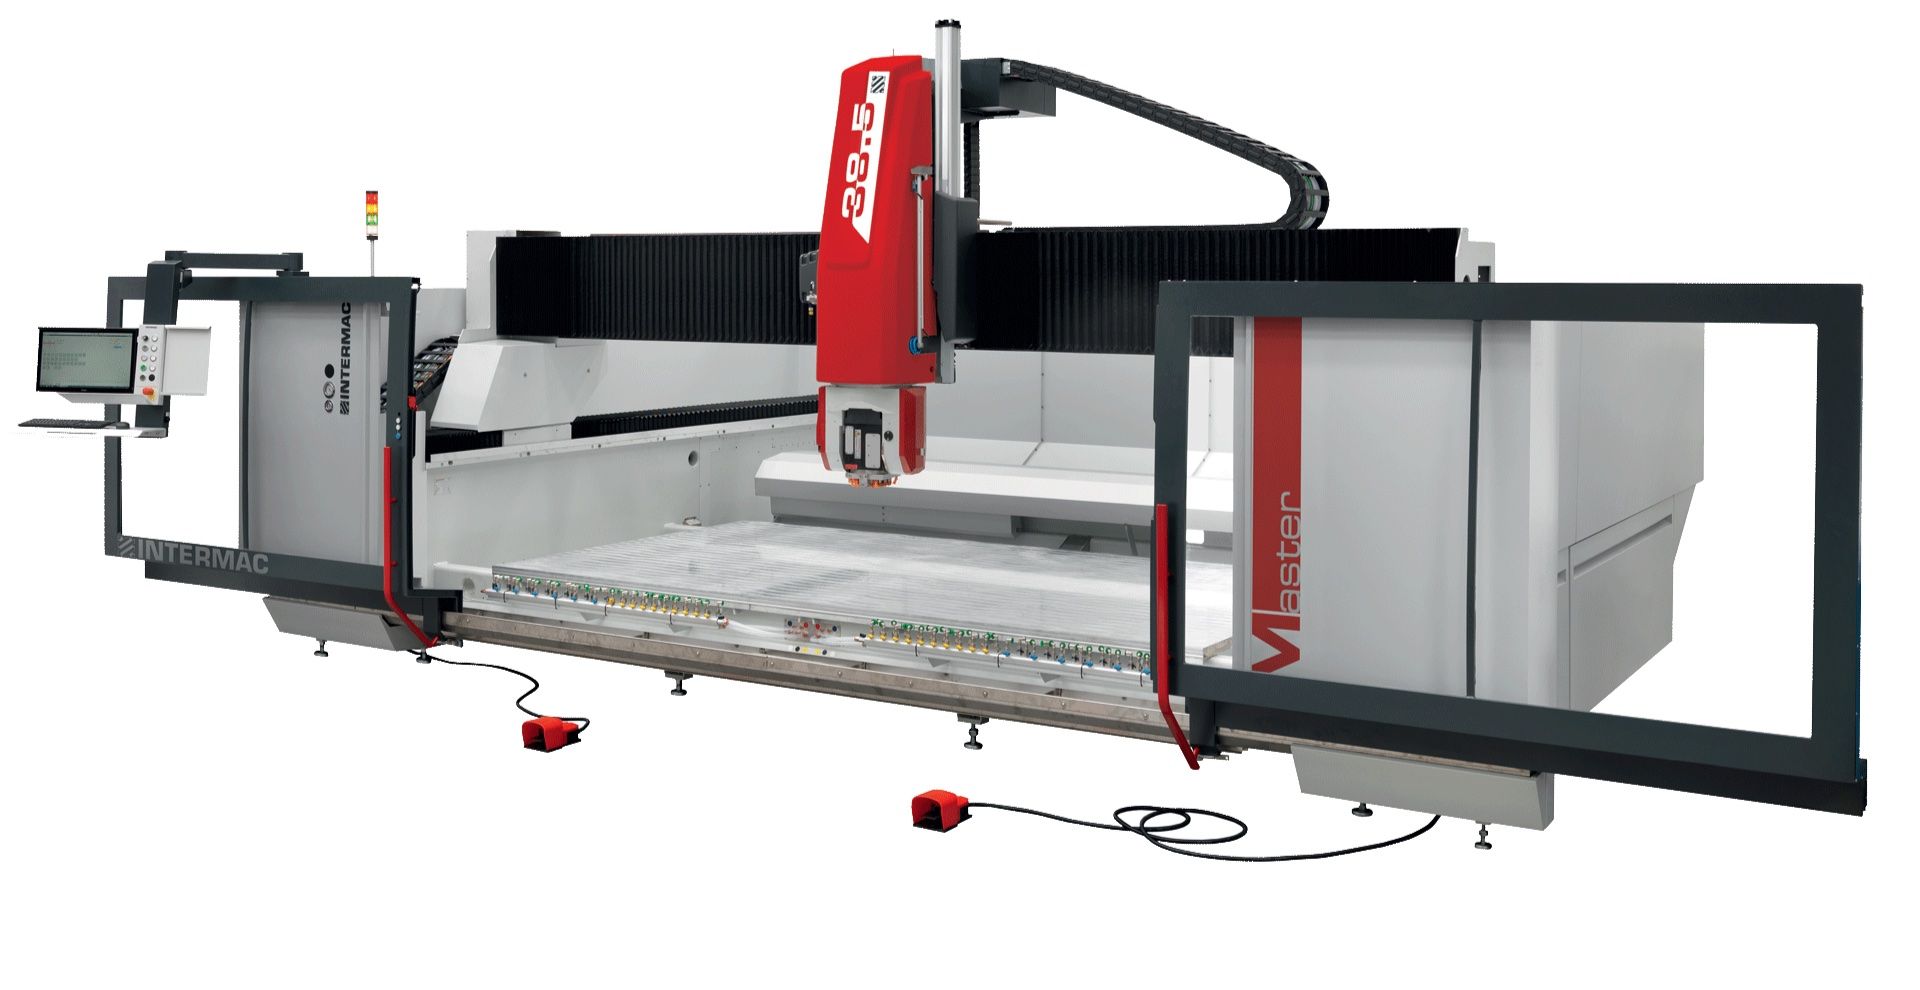 Intermac Master Series CNC work center for stone processing